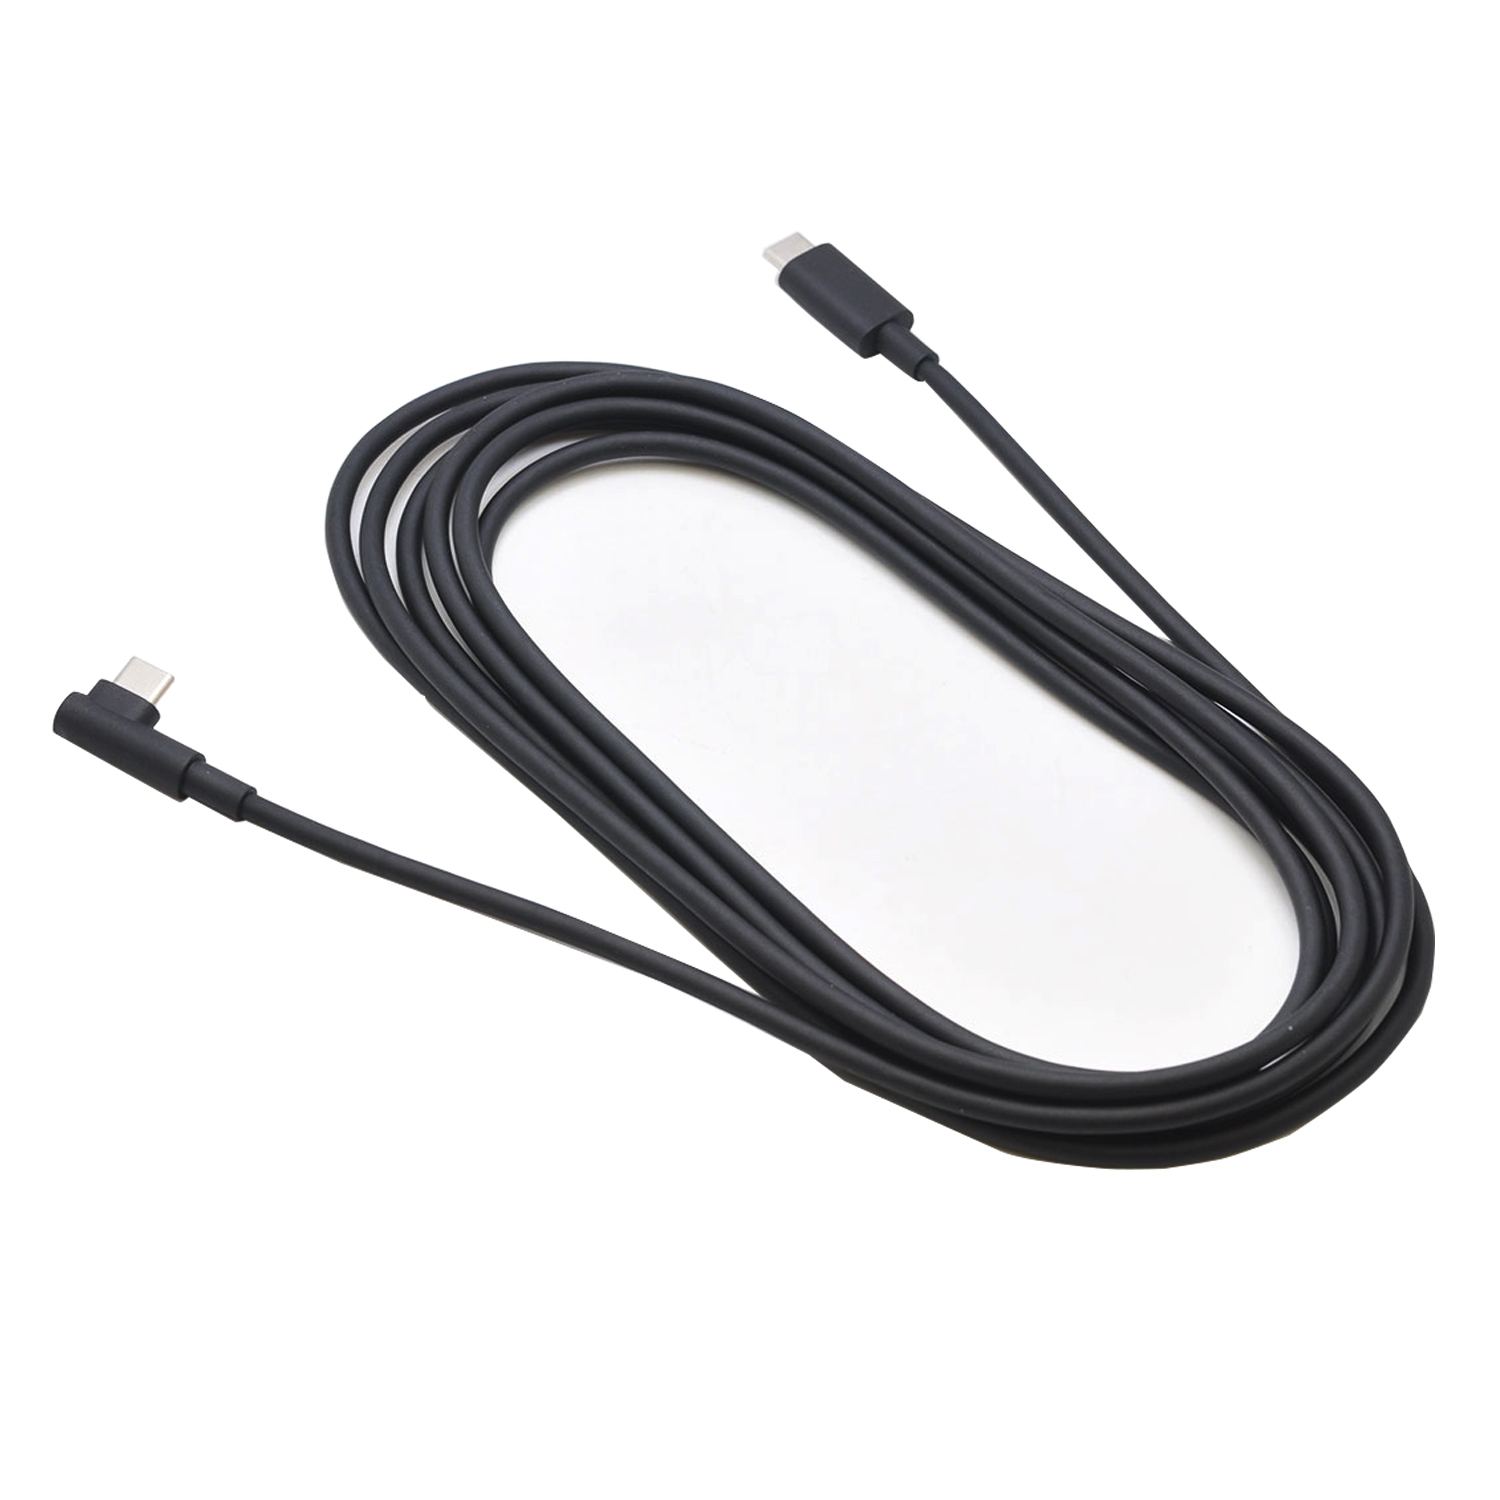 Oculus Quest charging cable